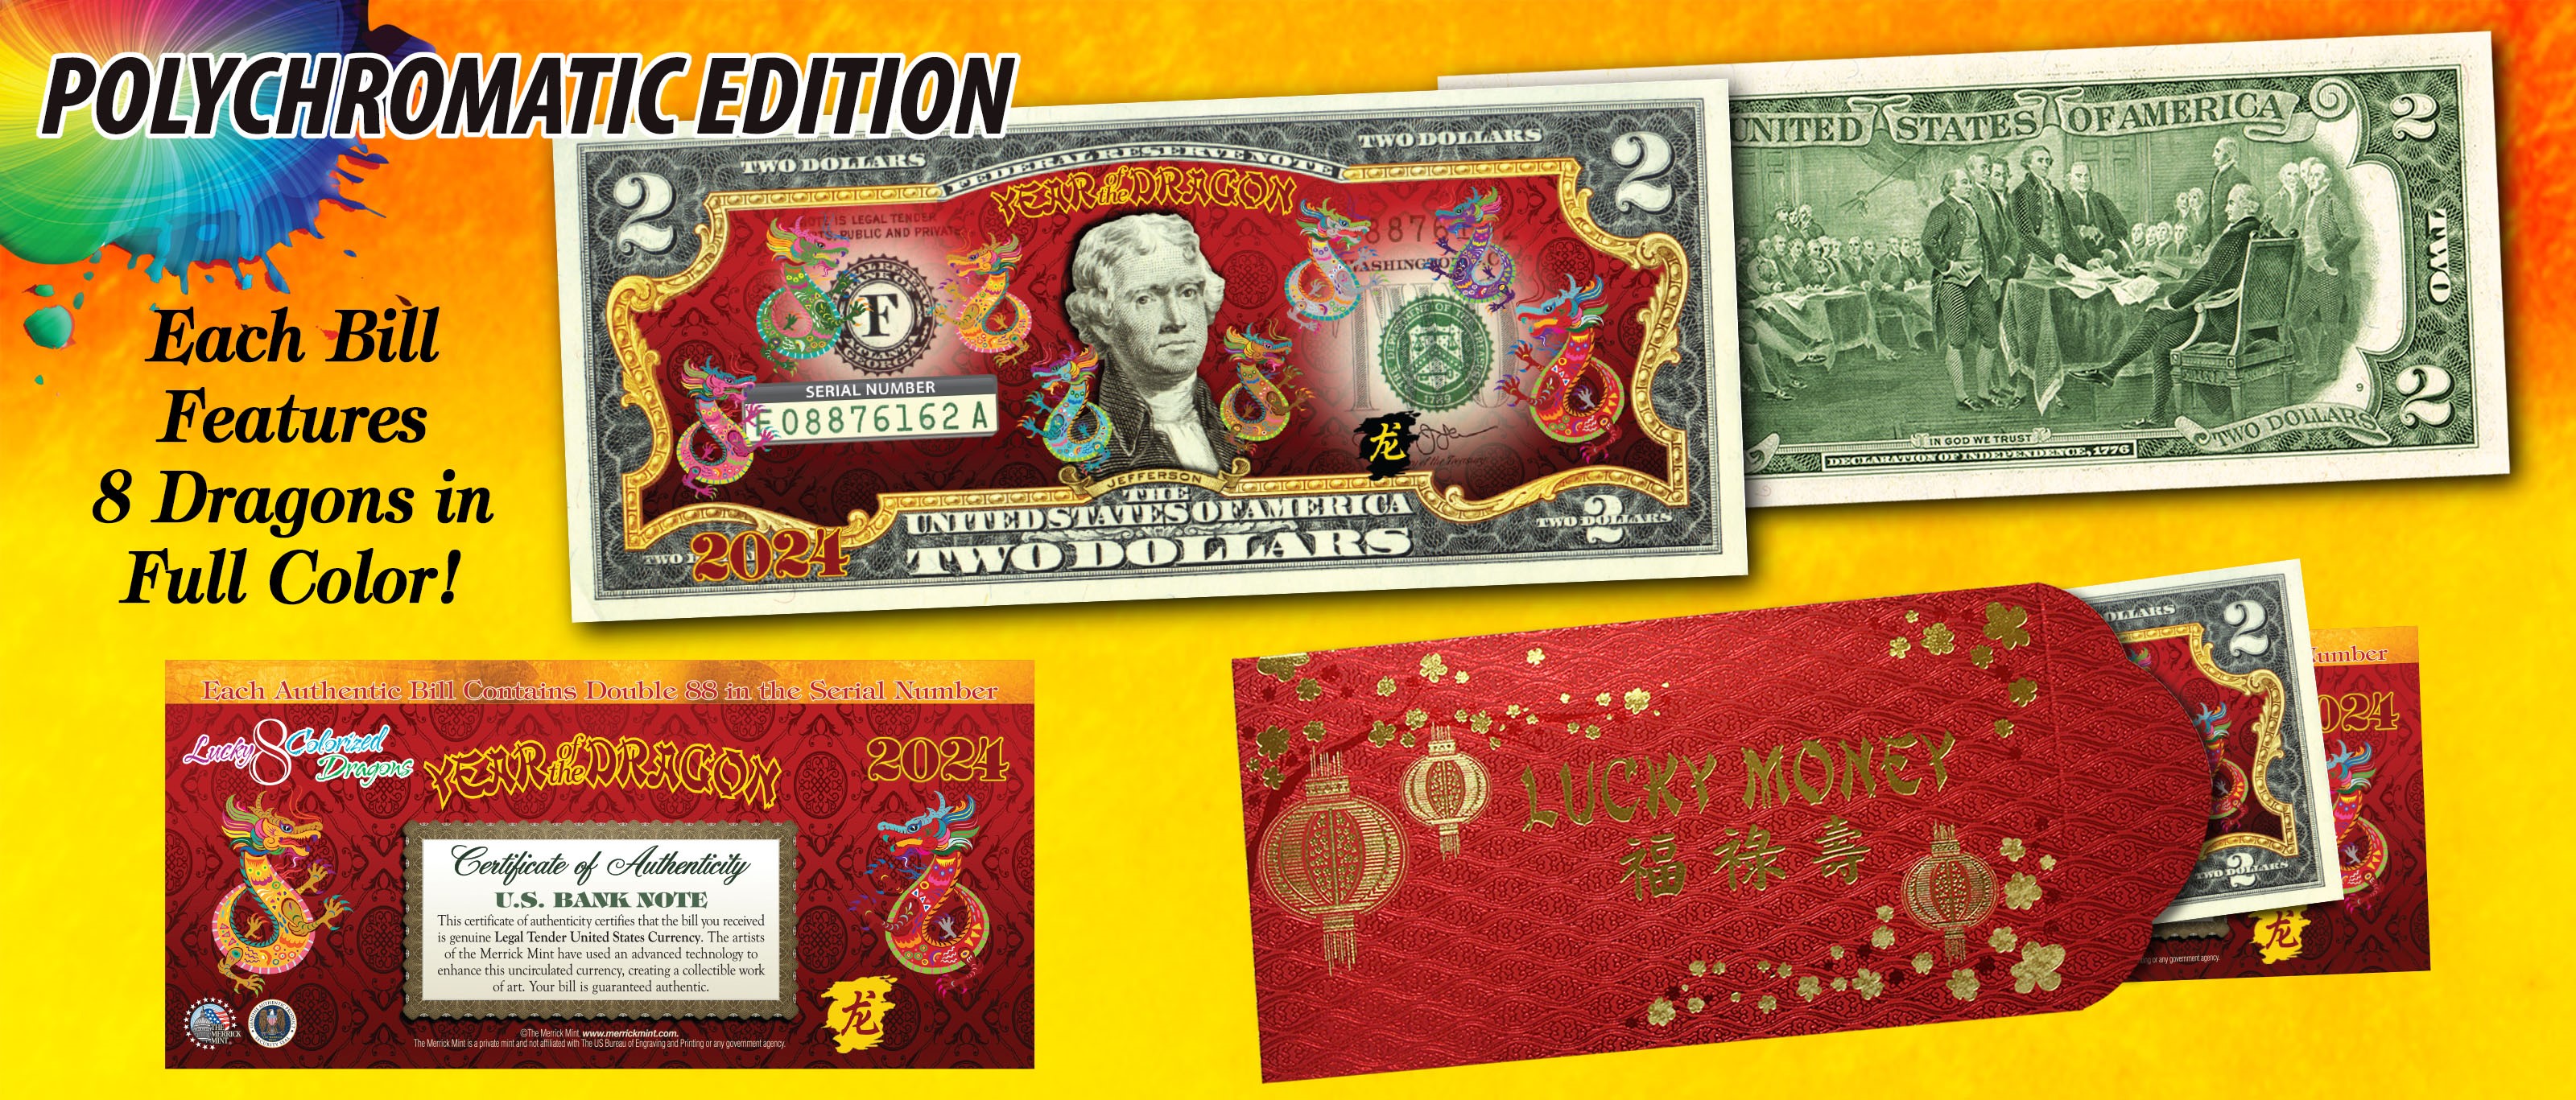 Pack of 50 Deluxe LUCKY MONEY Red Envelopes CHINESE NEW YEAR Gift